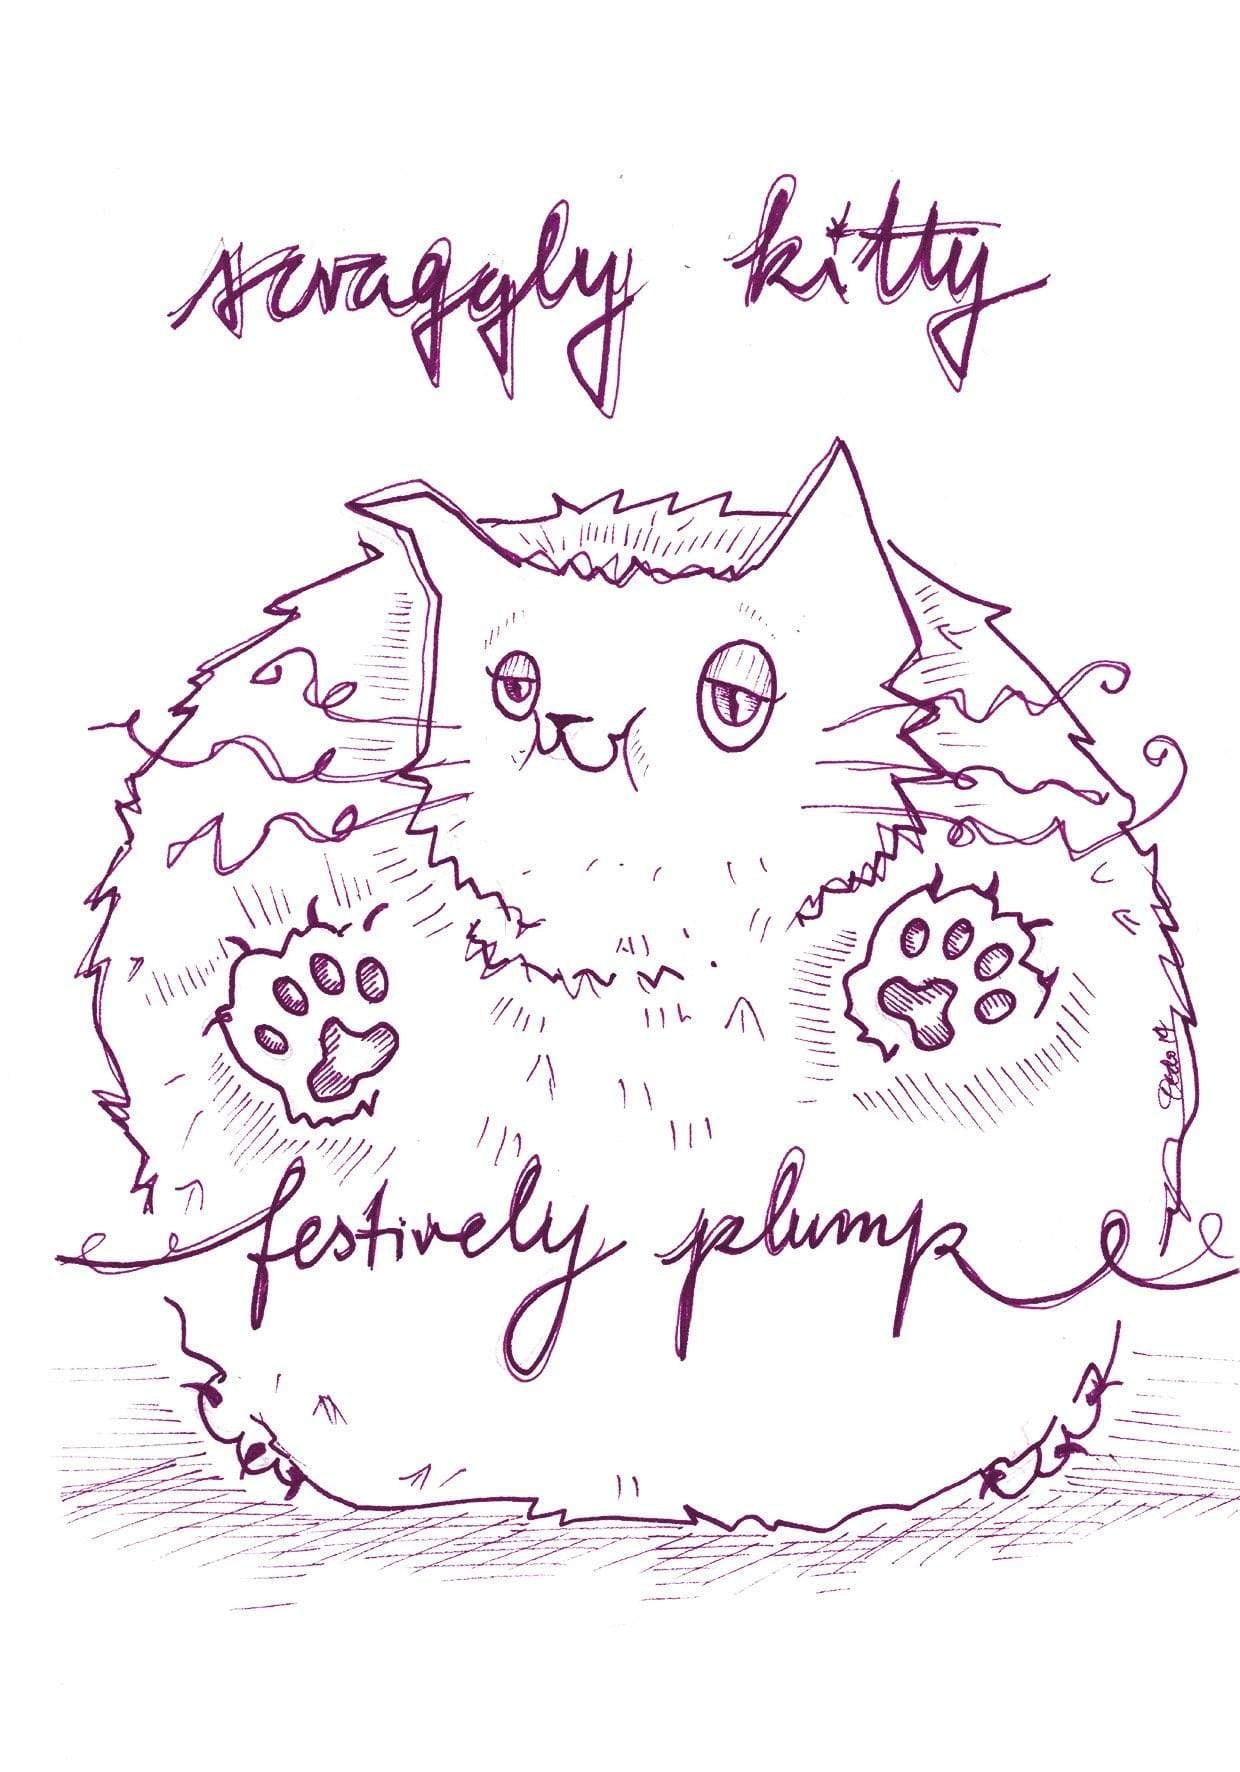 Scraggly Kitty Festively Plump Christmas Greeting Card